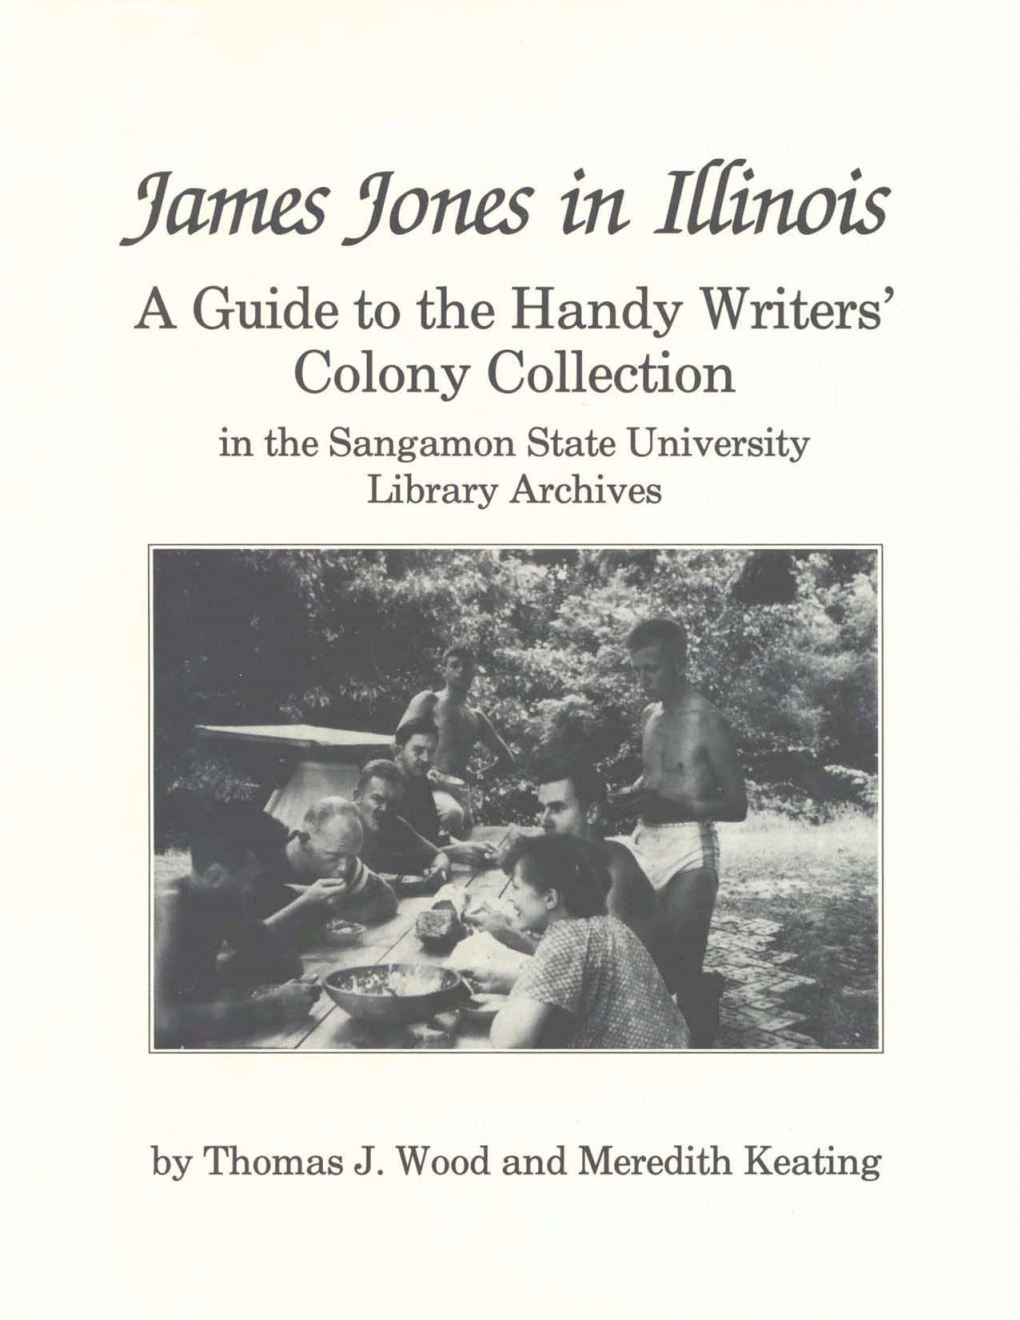 A Guide to the Handy Writers' Colony Collection in the Sangamon State University Library Archives